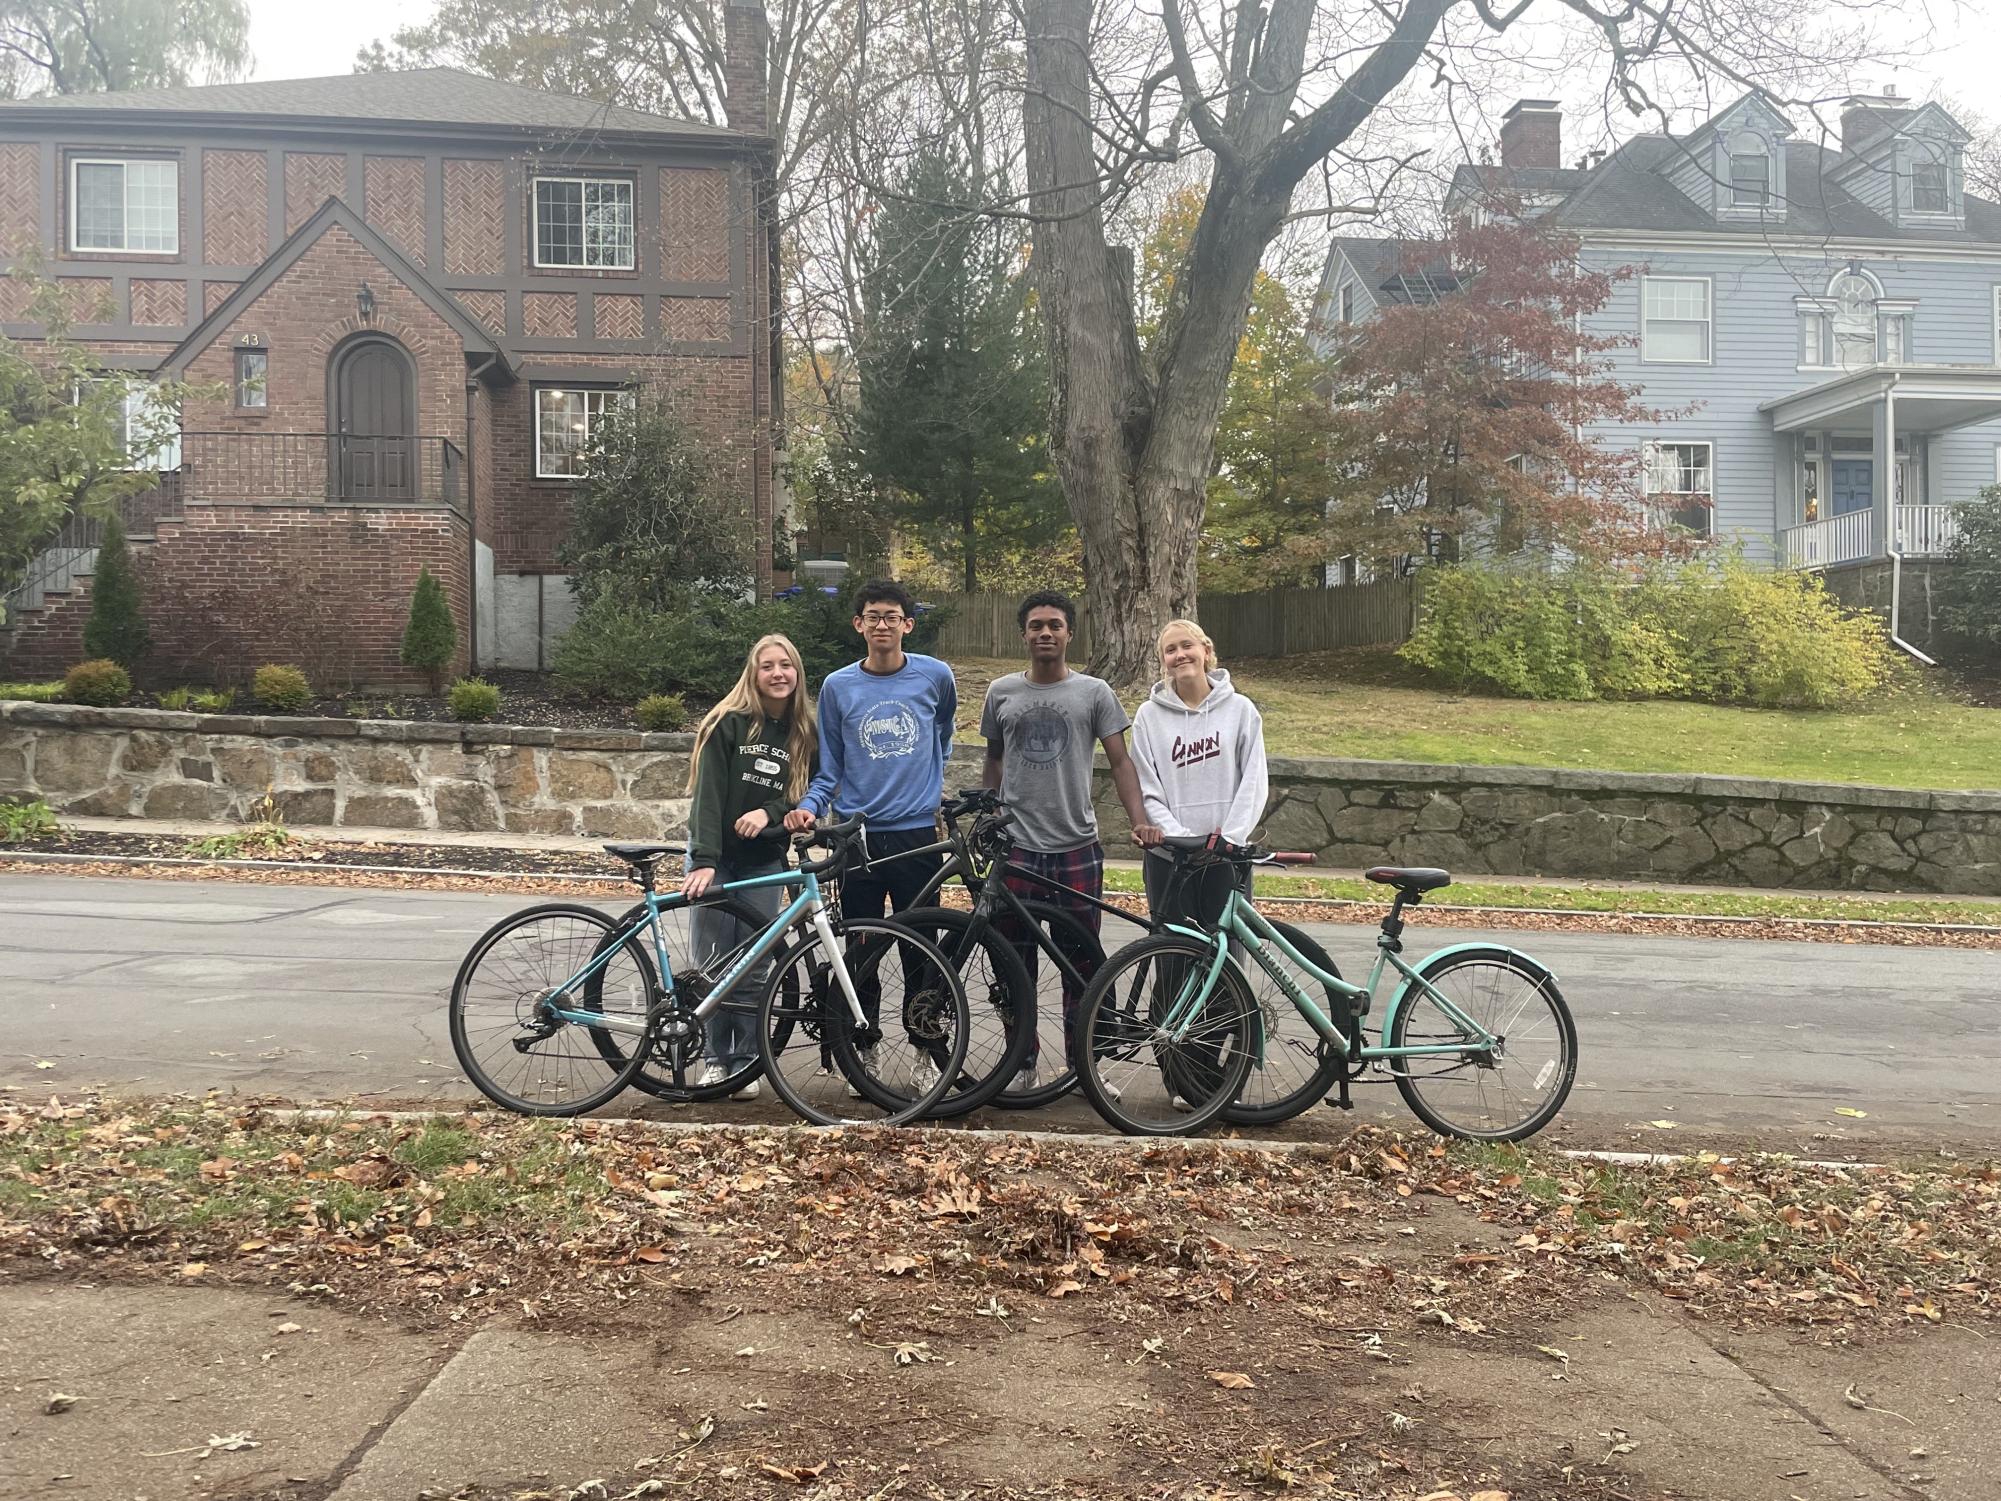 Biking Down Barriers Club founders Antonia Duffield, Lloyd Feng, Ilan Luszczynski-Williams, and Suvi Carlile encourage students to park the car and use a bike.